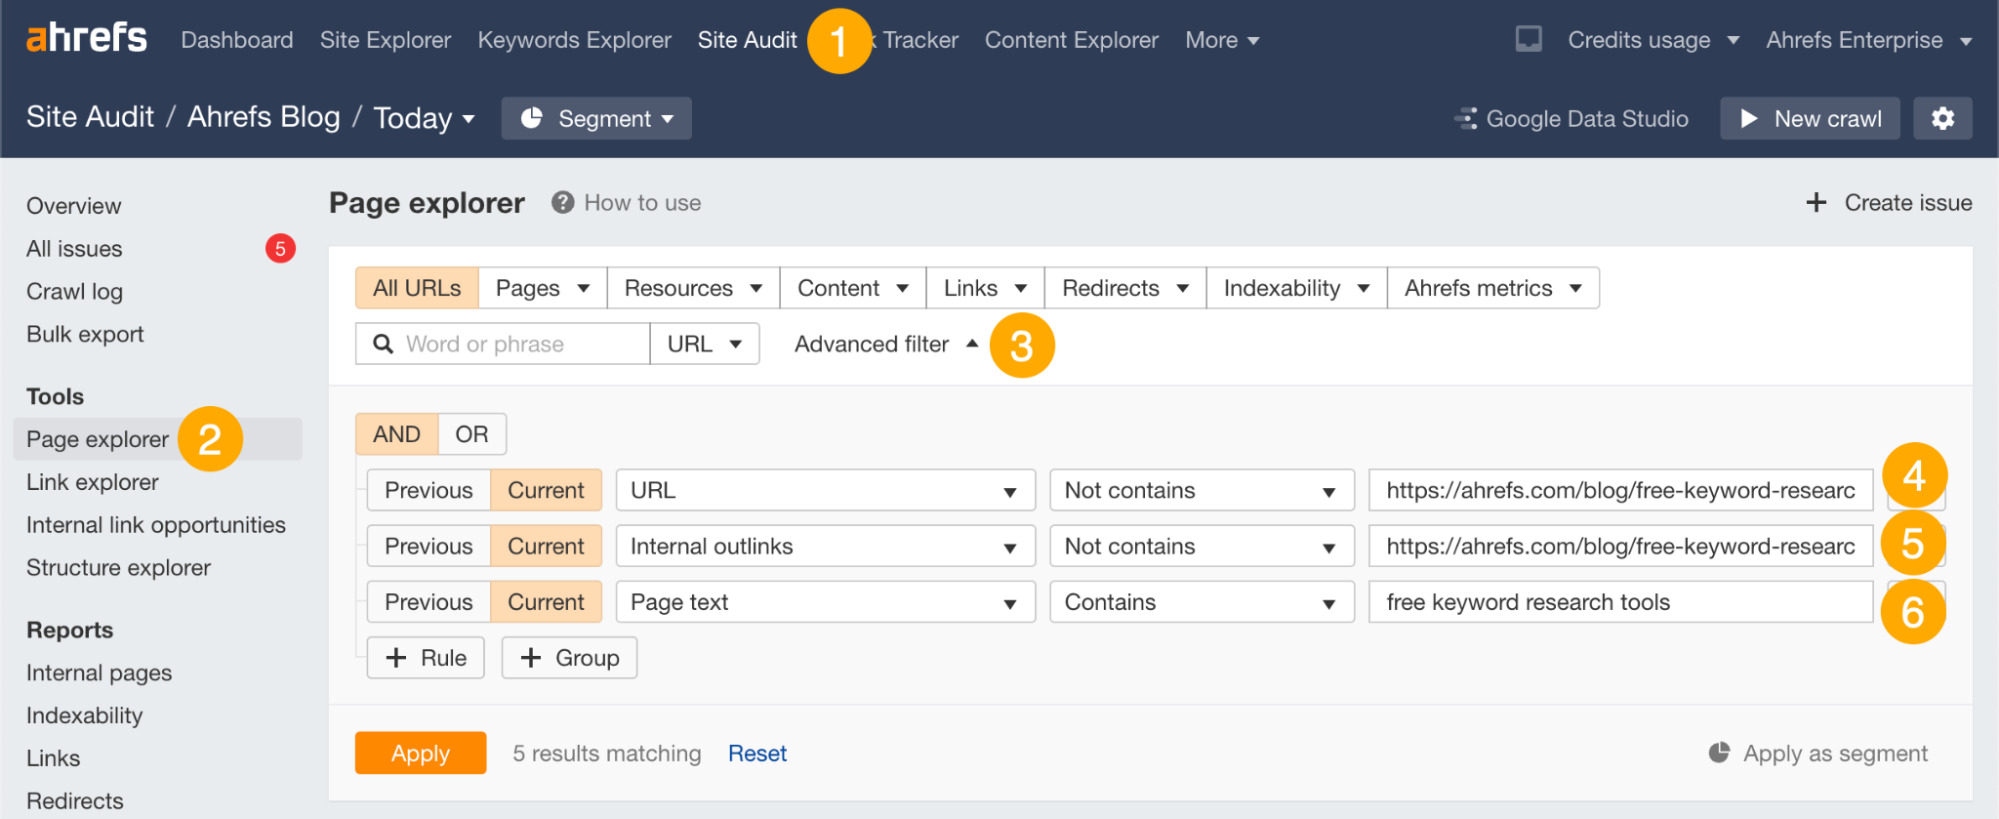 Using the Page Explorer in Ahrefs' Site Audit to find internal link opportunities
